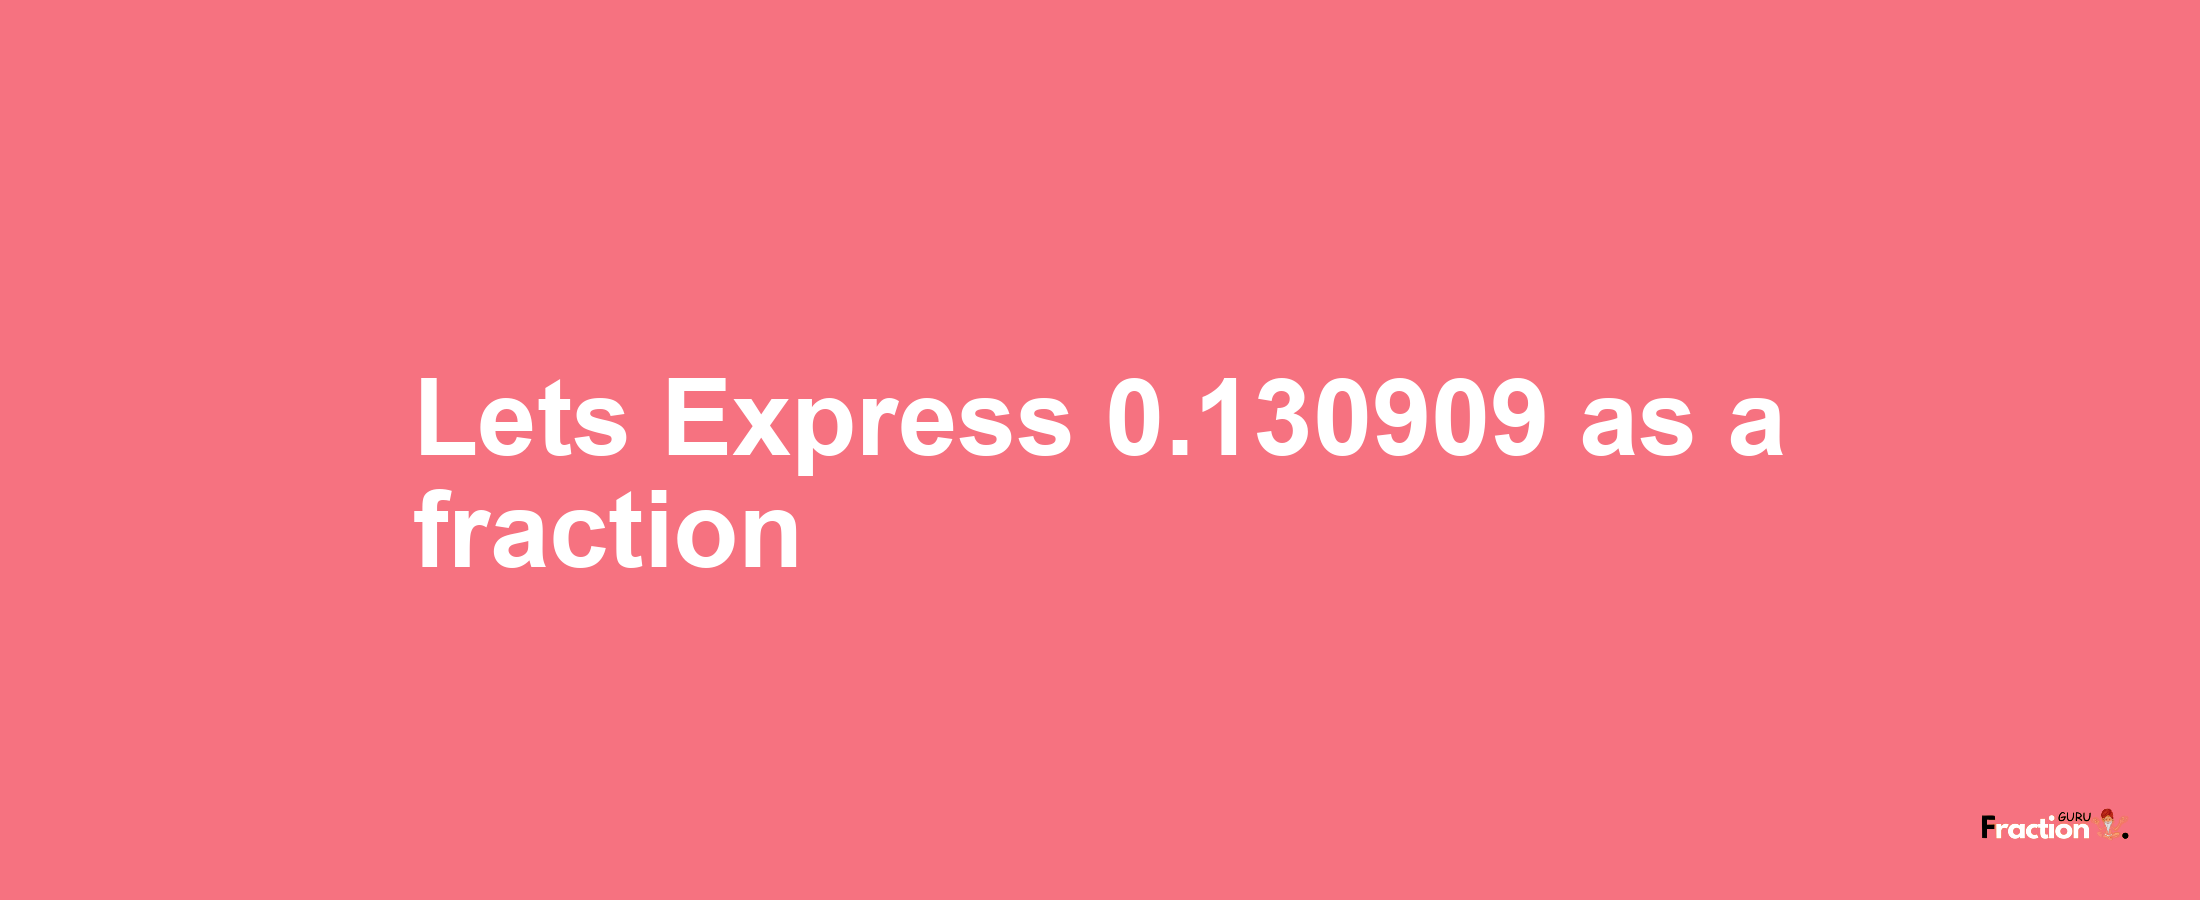 Lets Express 0.130909 as afraction